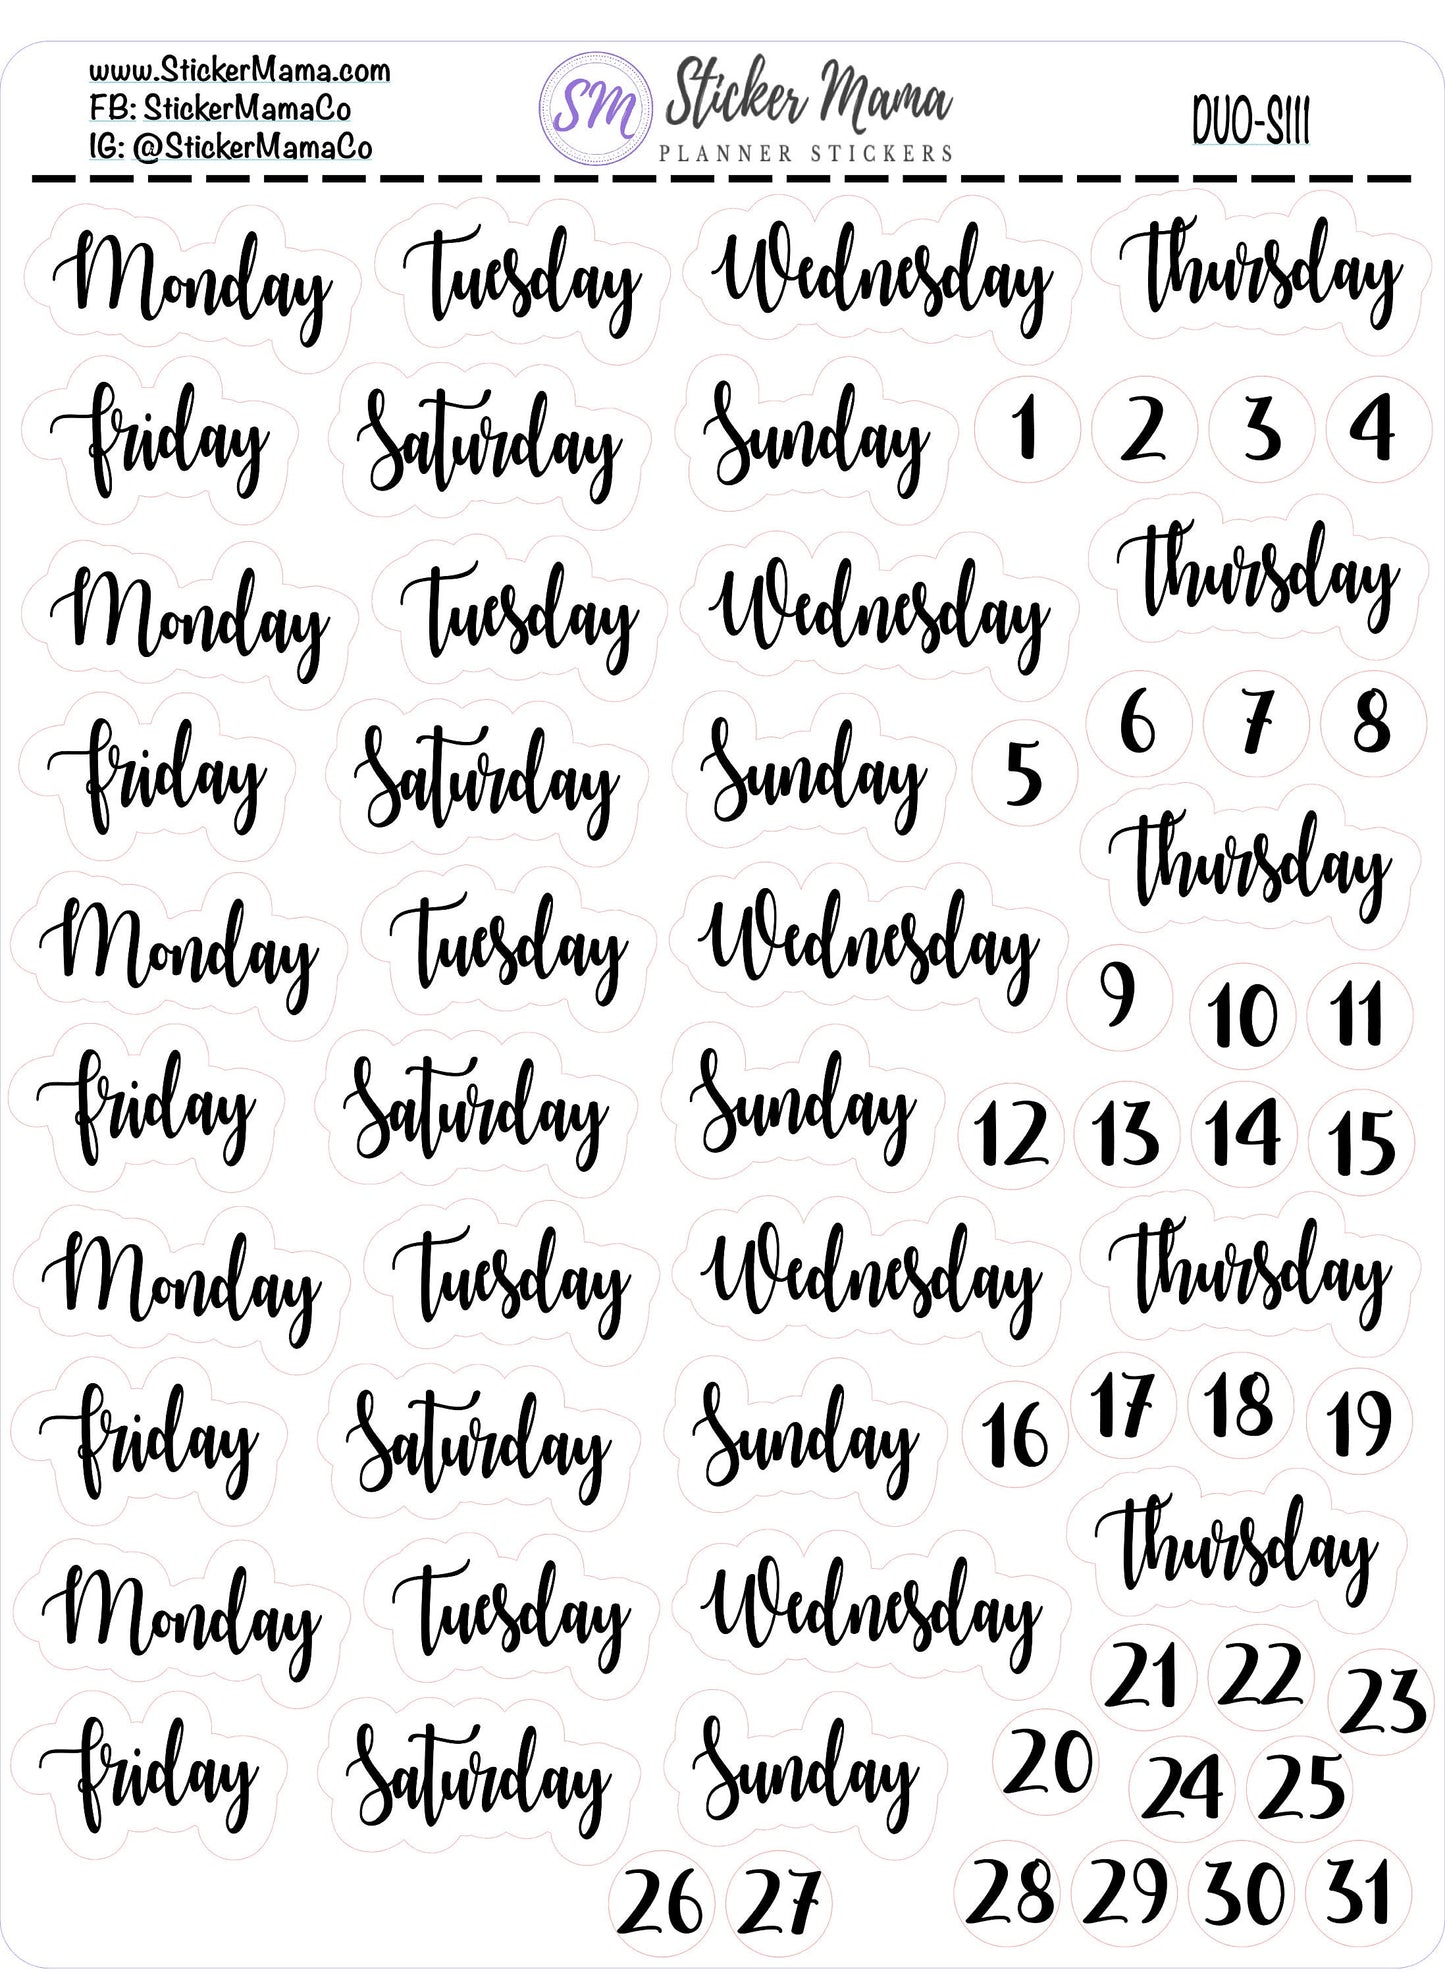 DAYS/DATES SCRIPT S111 Days of the week Icons Dates Stickers Ec Days and Dates Stickers Sticker for ec month stickers eclp monthly stickers